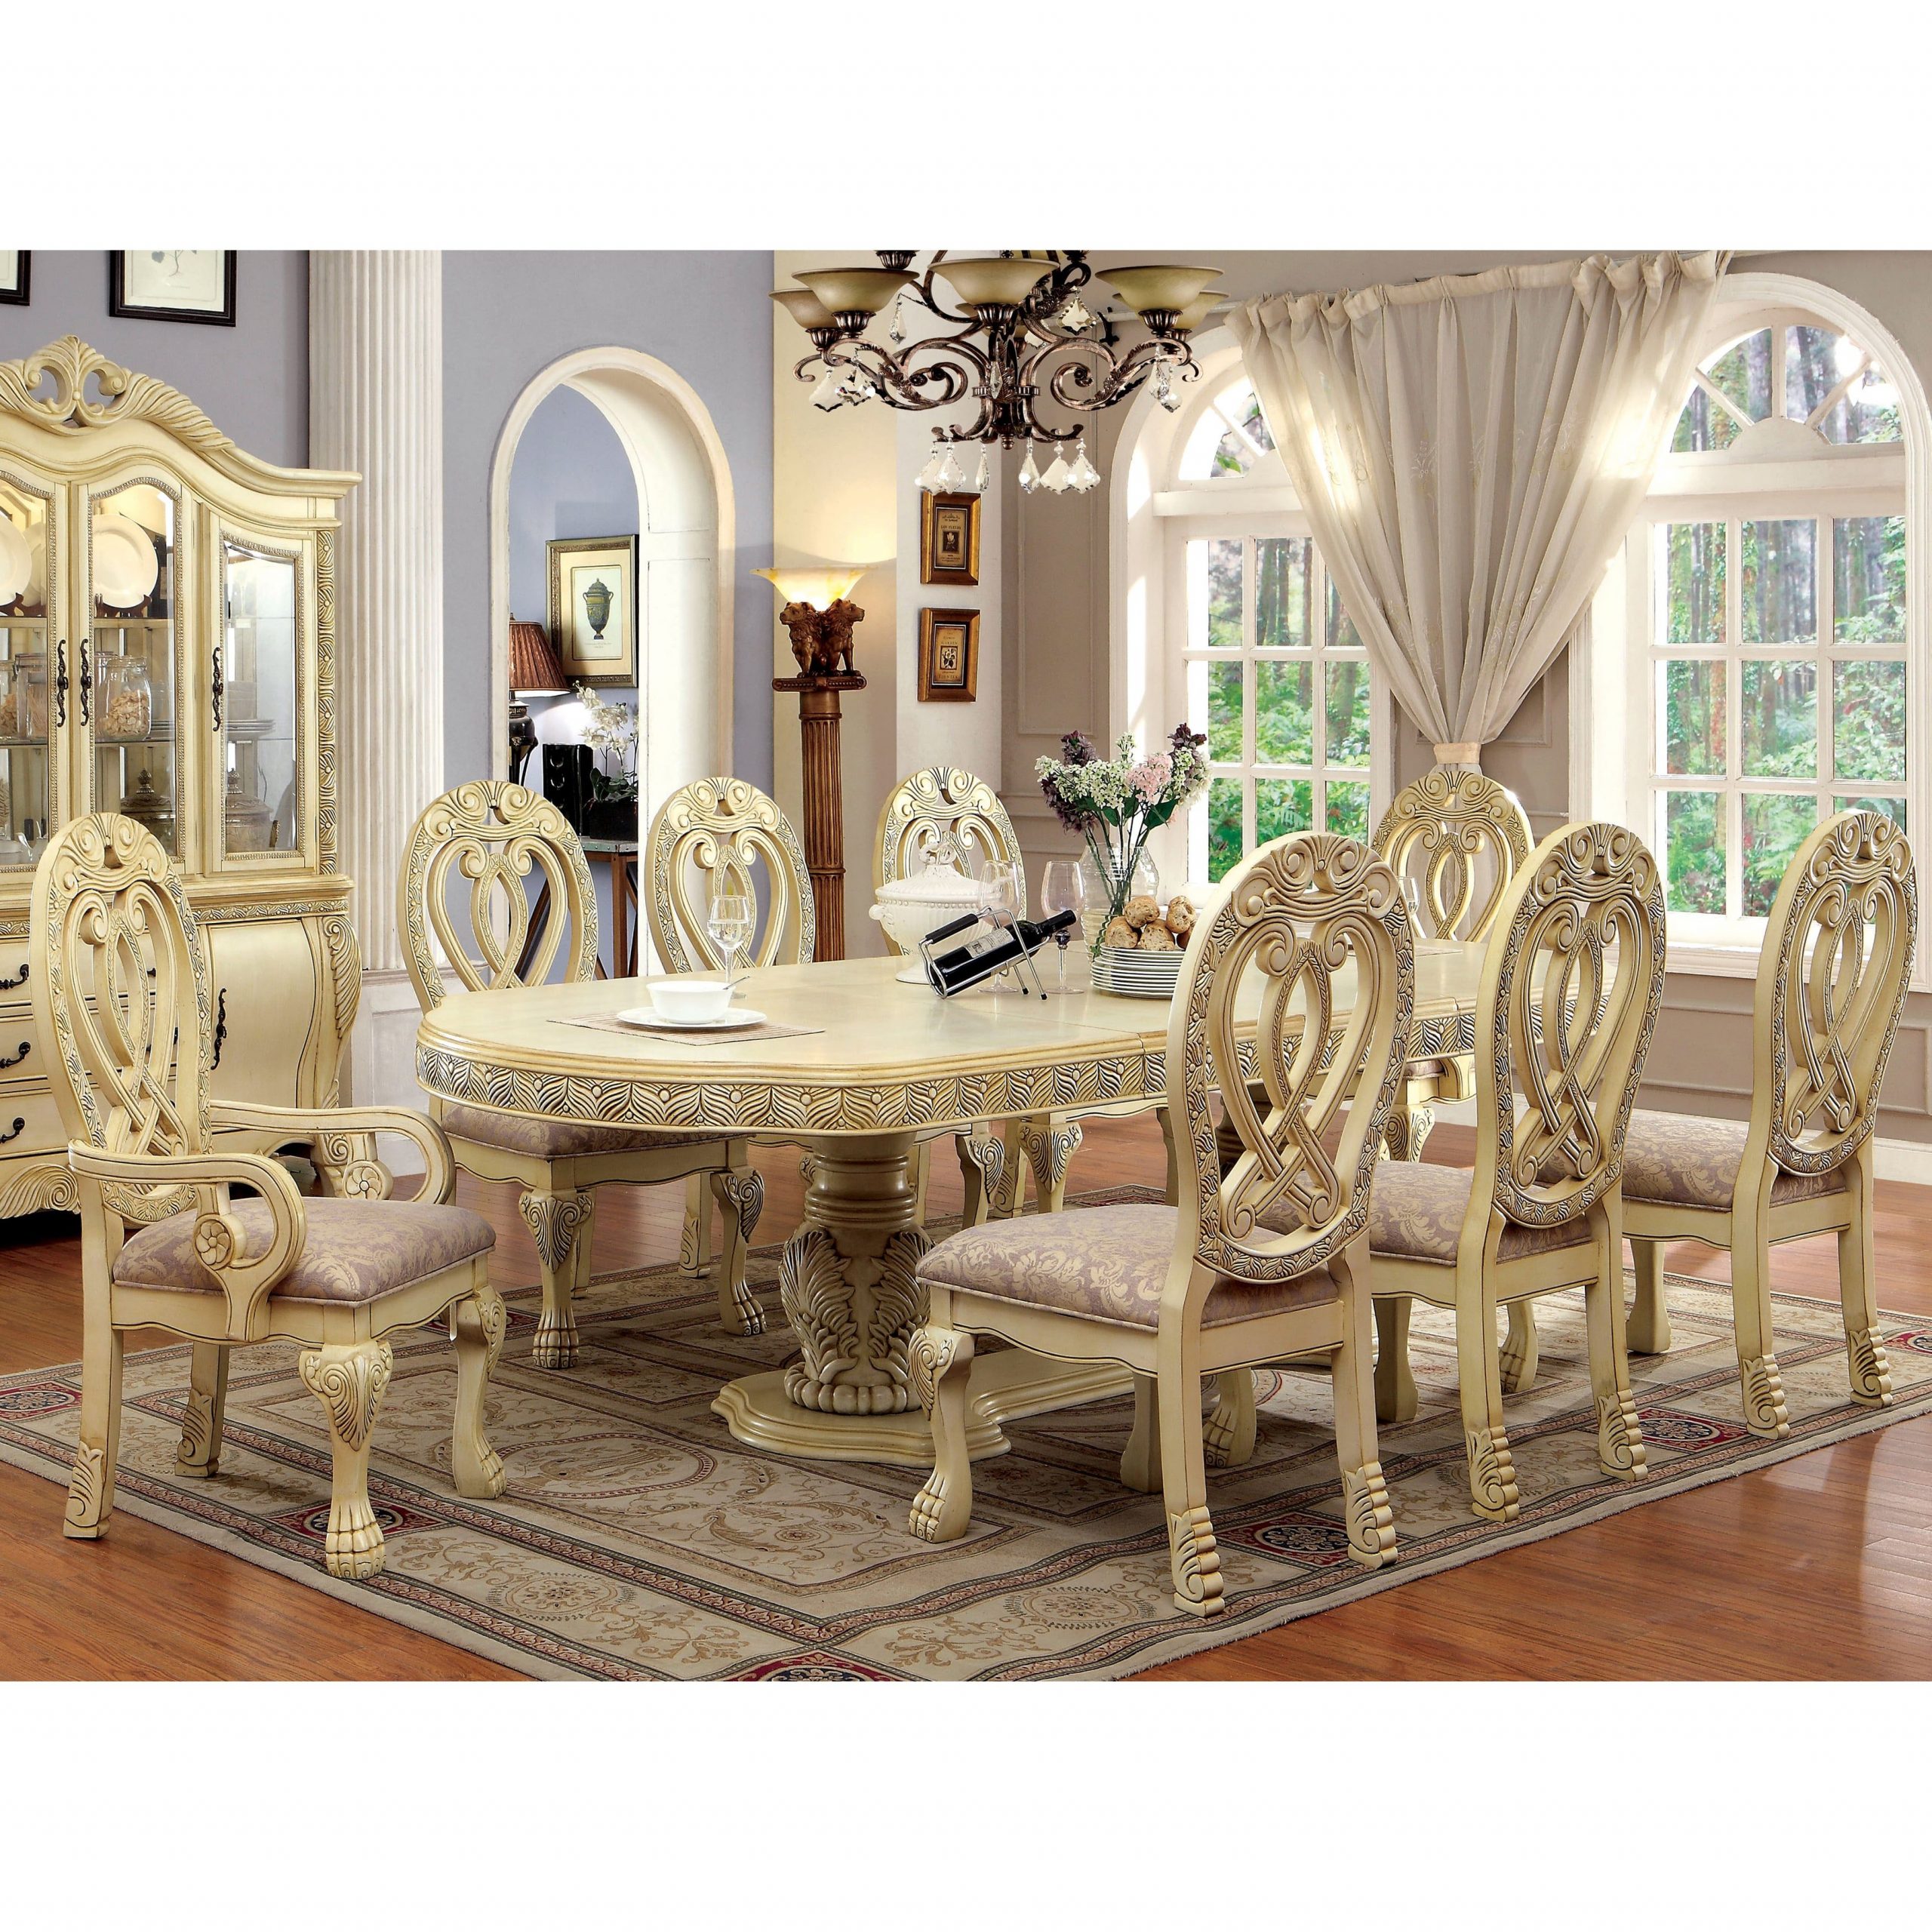 Furniture Of America Beaufort Solid Wood Formal 9 Piece intended for sizing 3500 X 3500